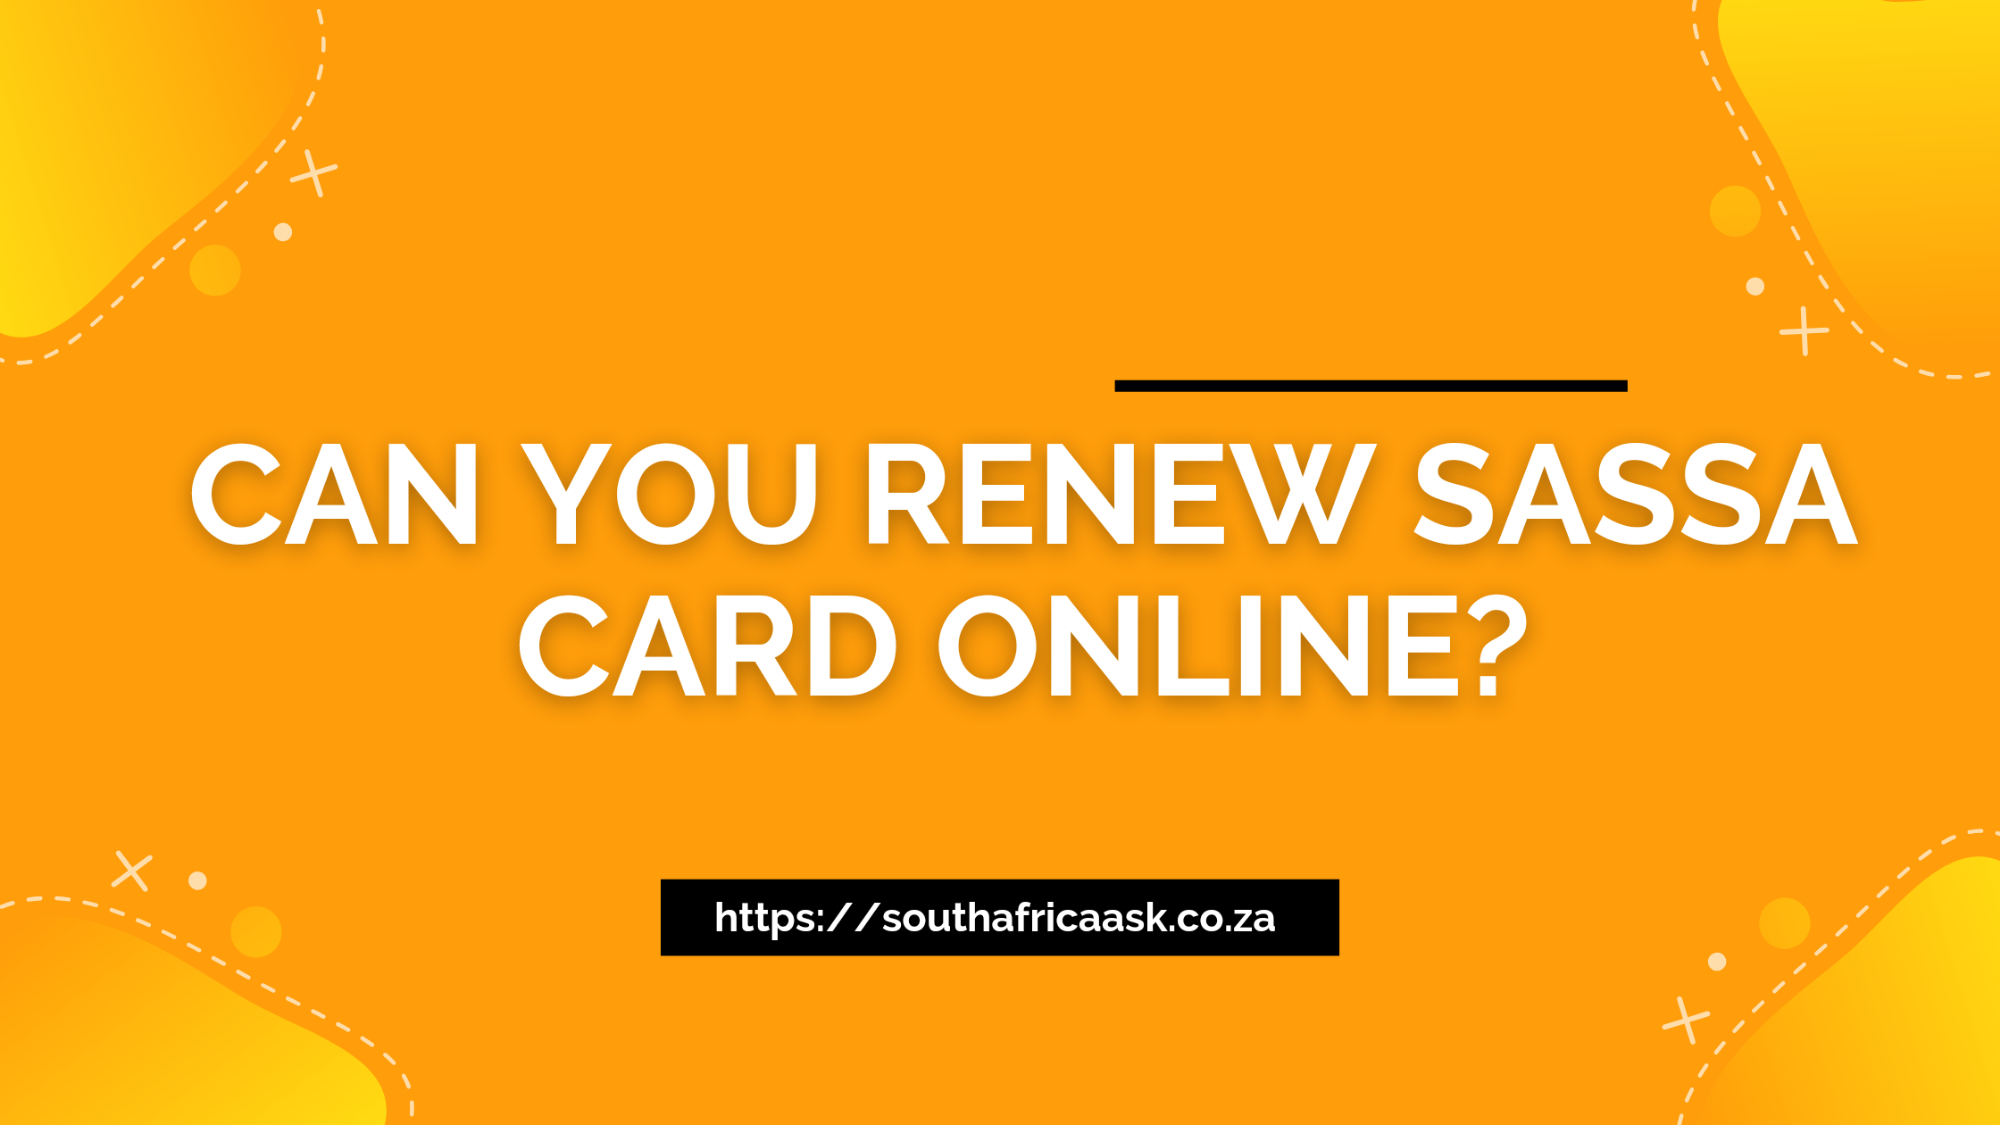 Can You Renew SASSA Card Online?